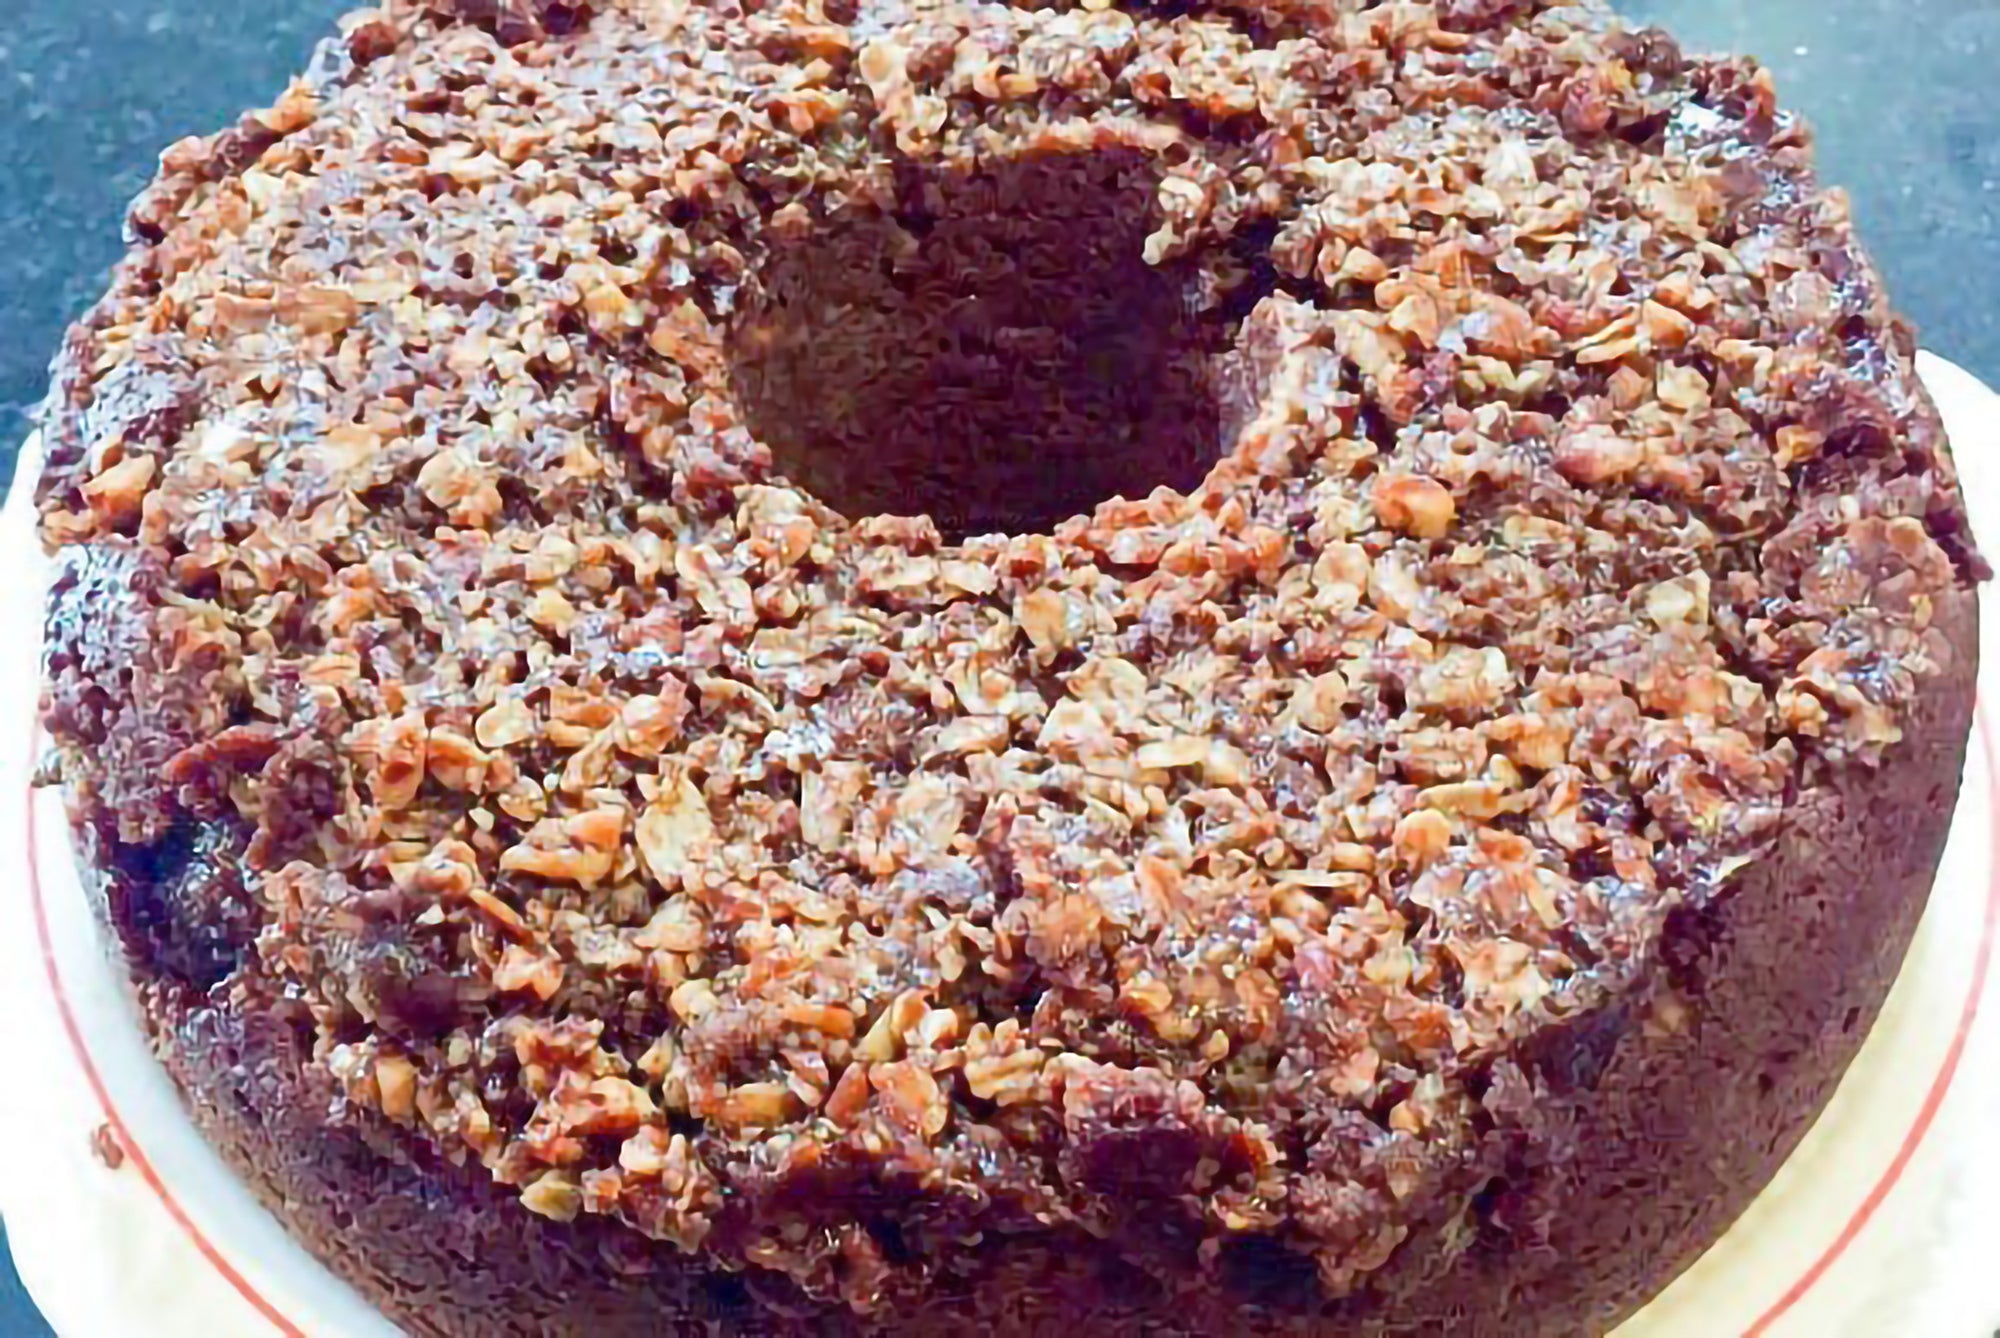 Apple Cinnamon Coffee Cake made with Epicurean Butter Cinnamon & Brown Sugar Flavored Butter